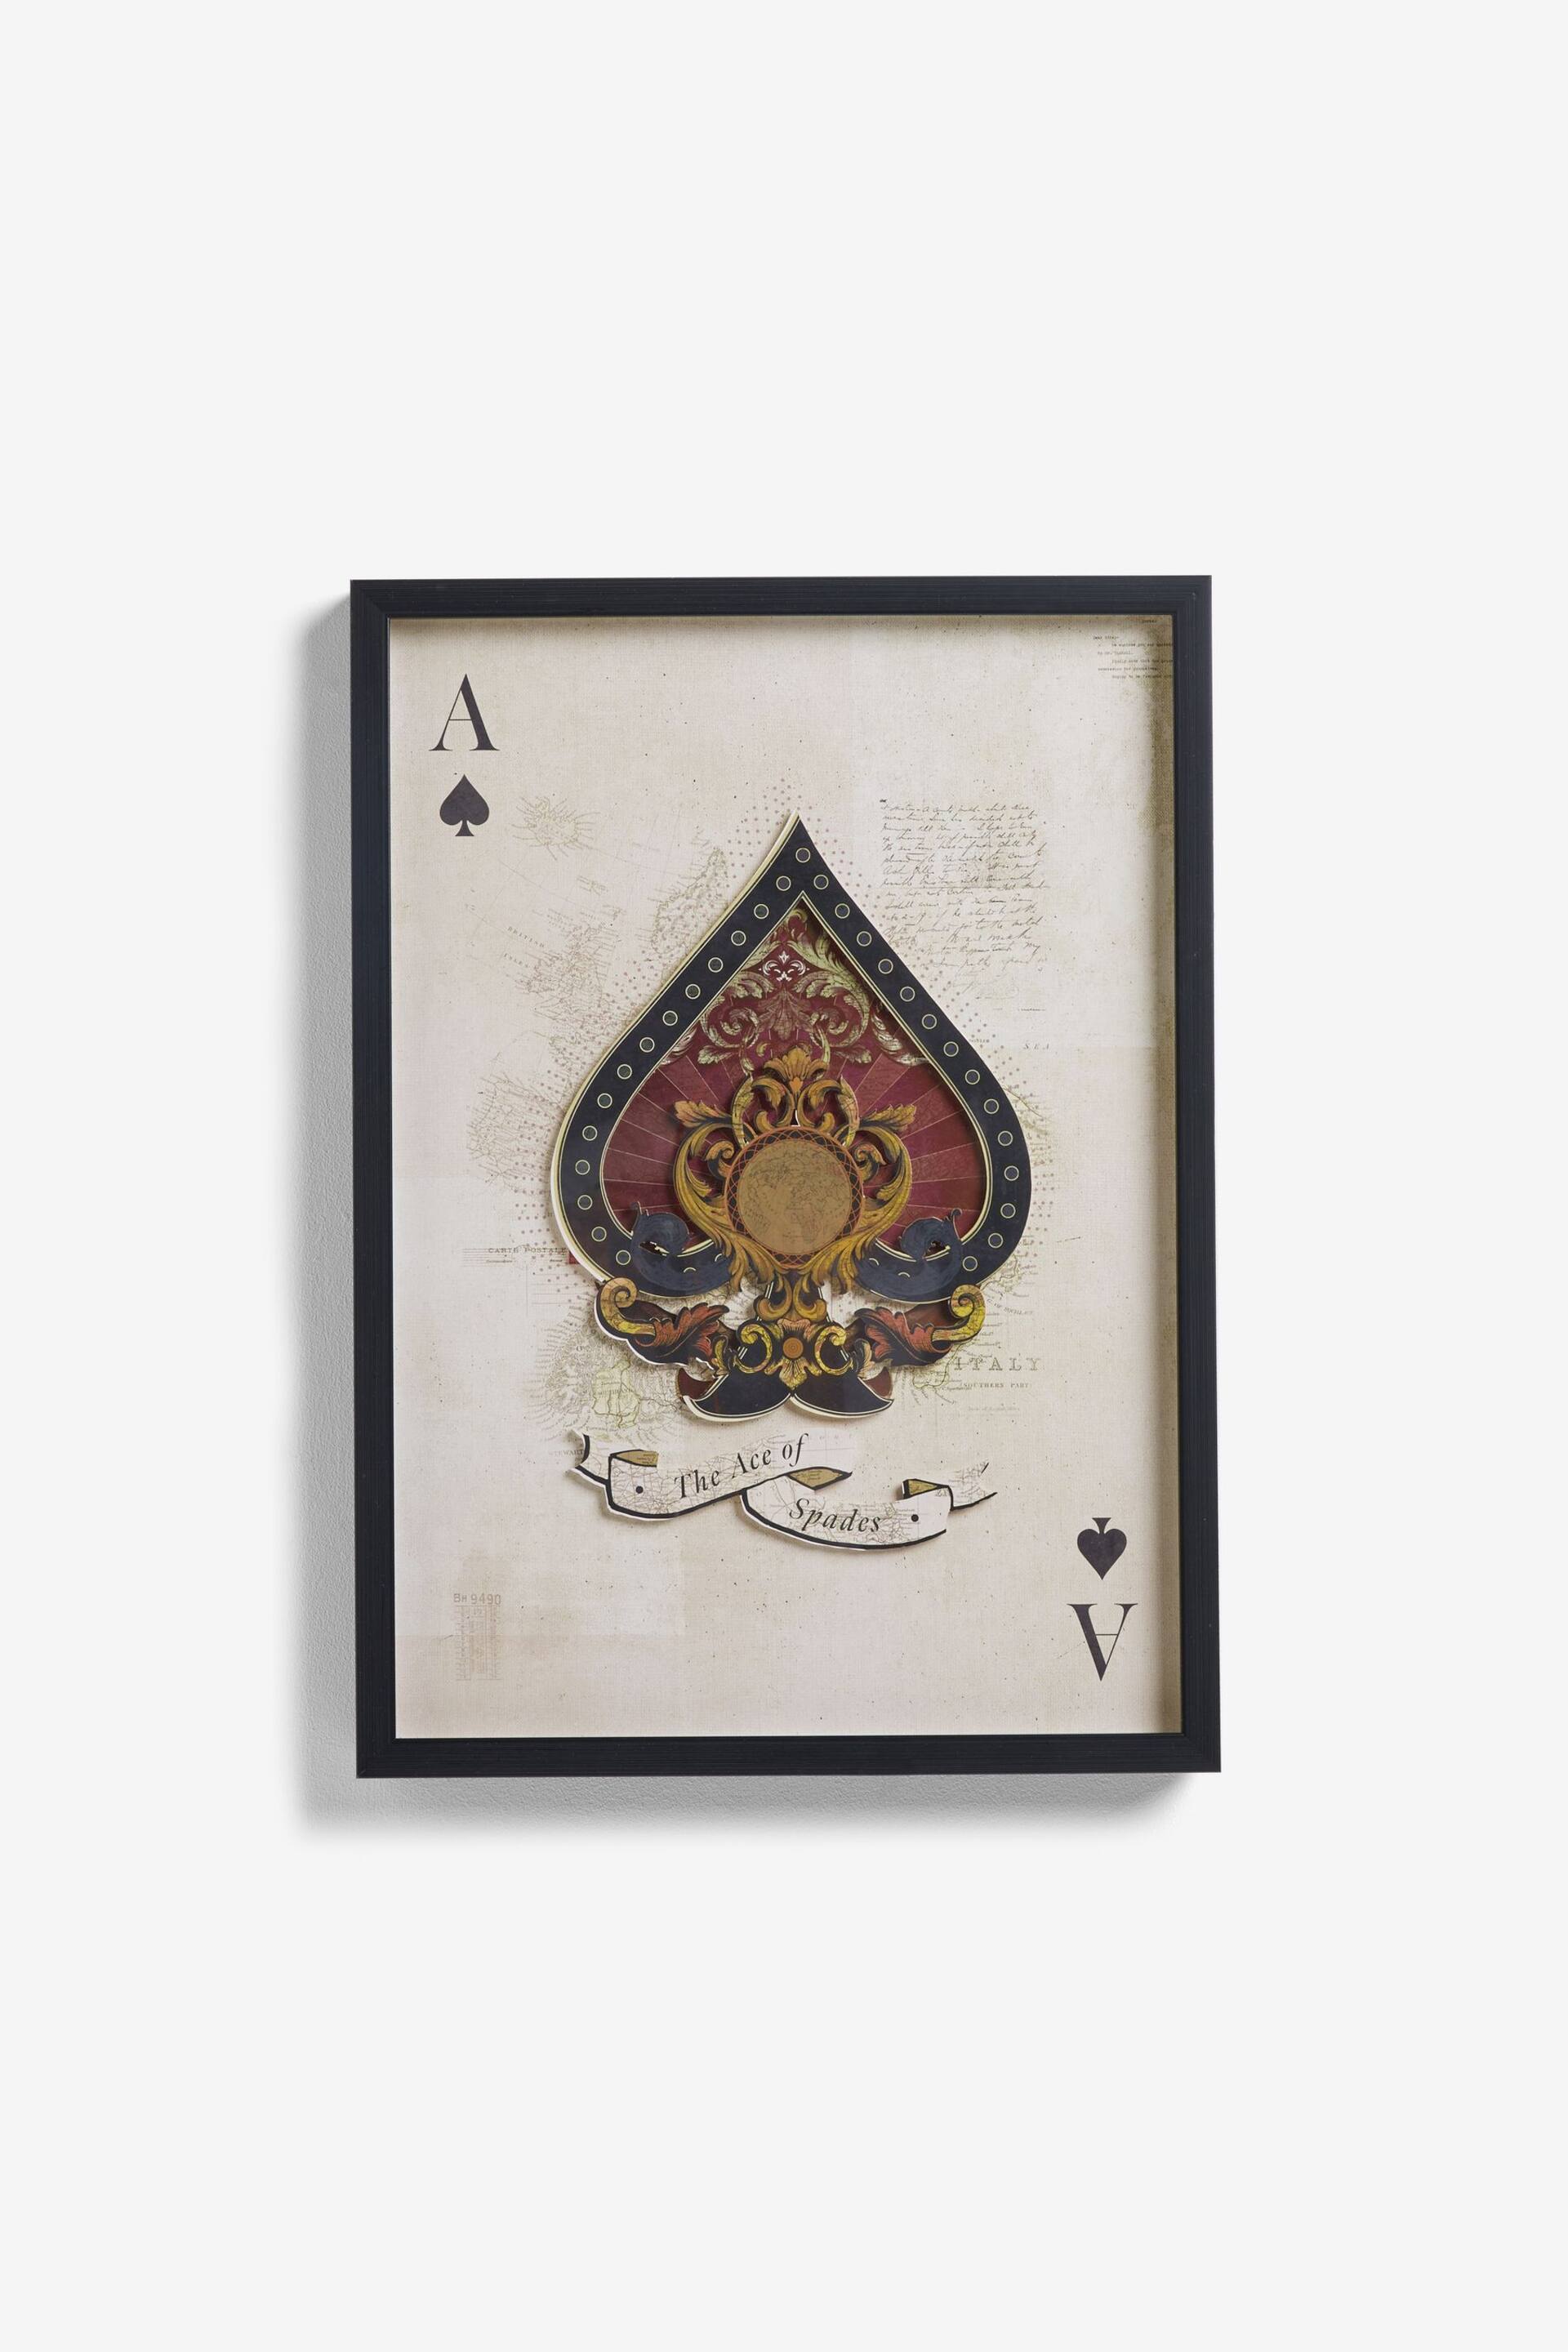 Monochrome Playing Card Framed Ace Wall Art - Image 4 of 6